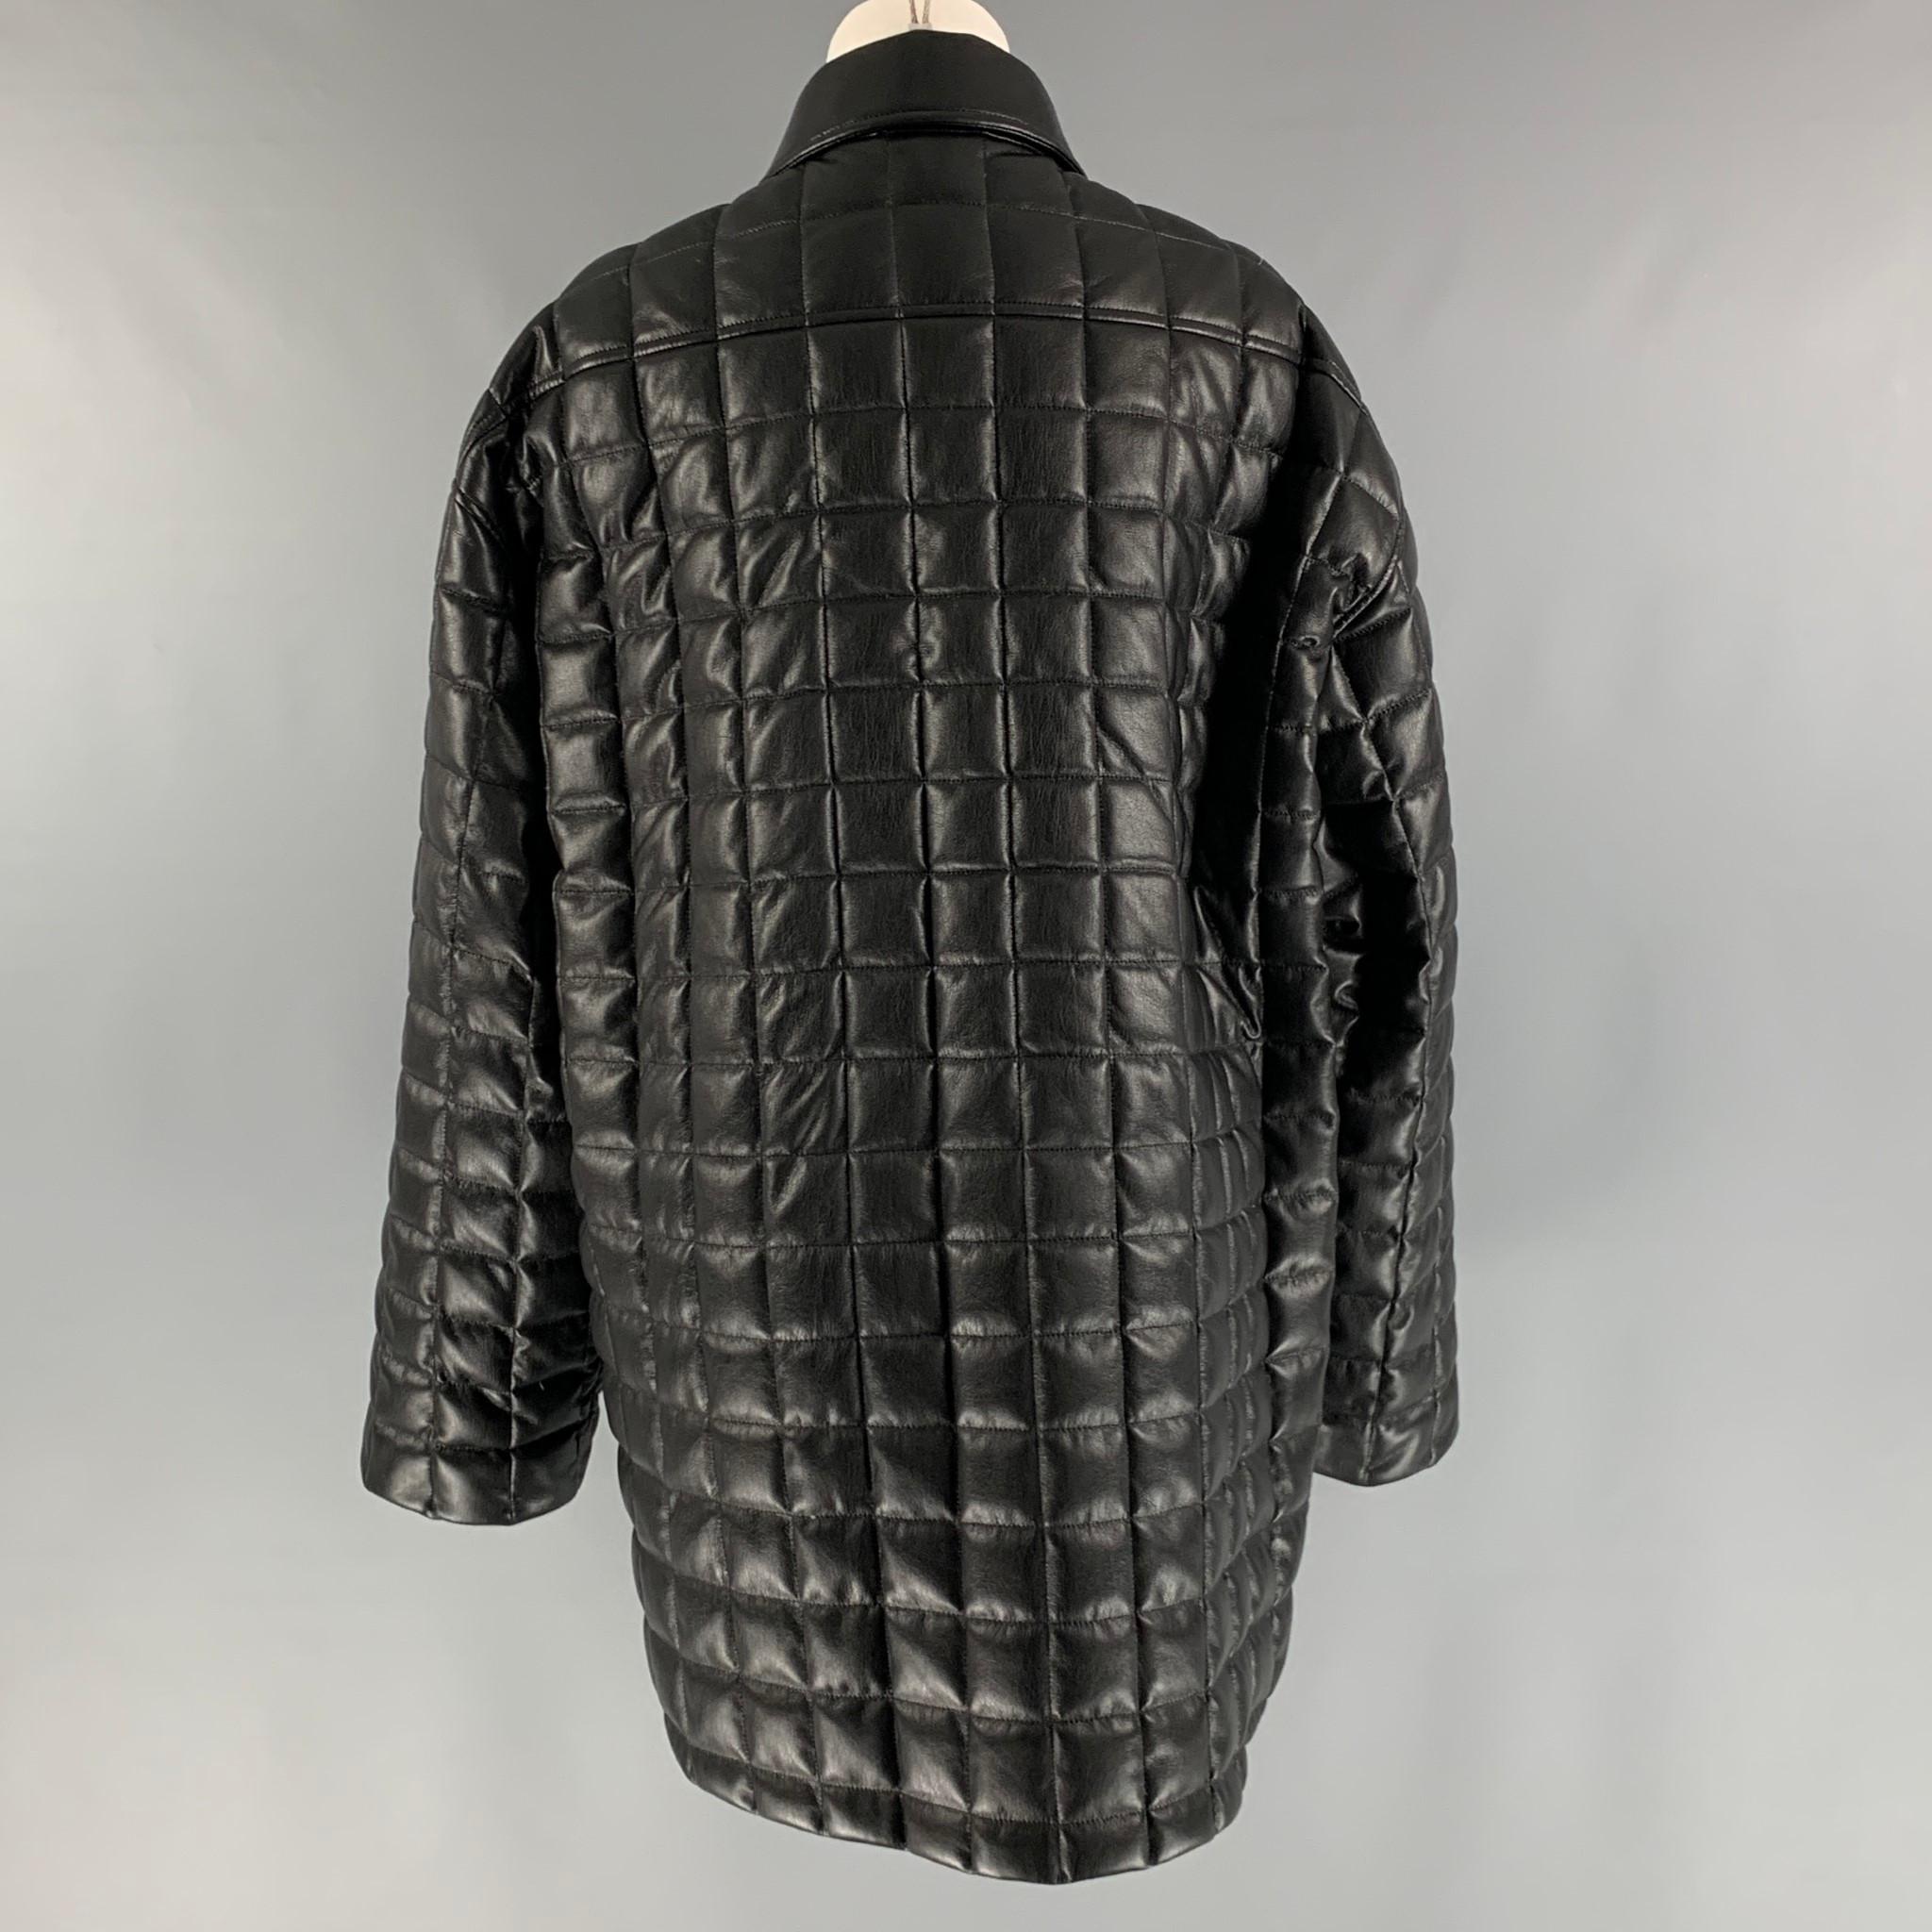 Women's IENKI IENKI Size XS Black Polyester Blend Quilted Faux Leather Jacket